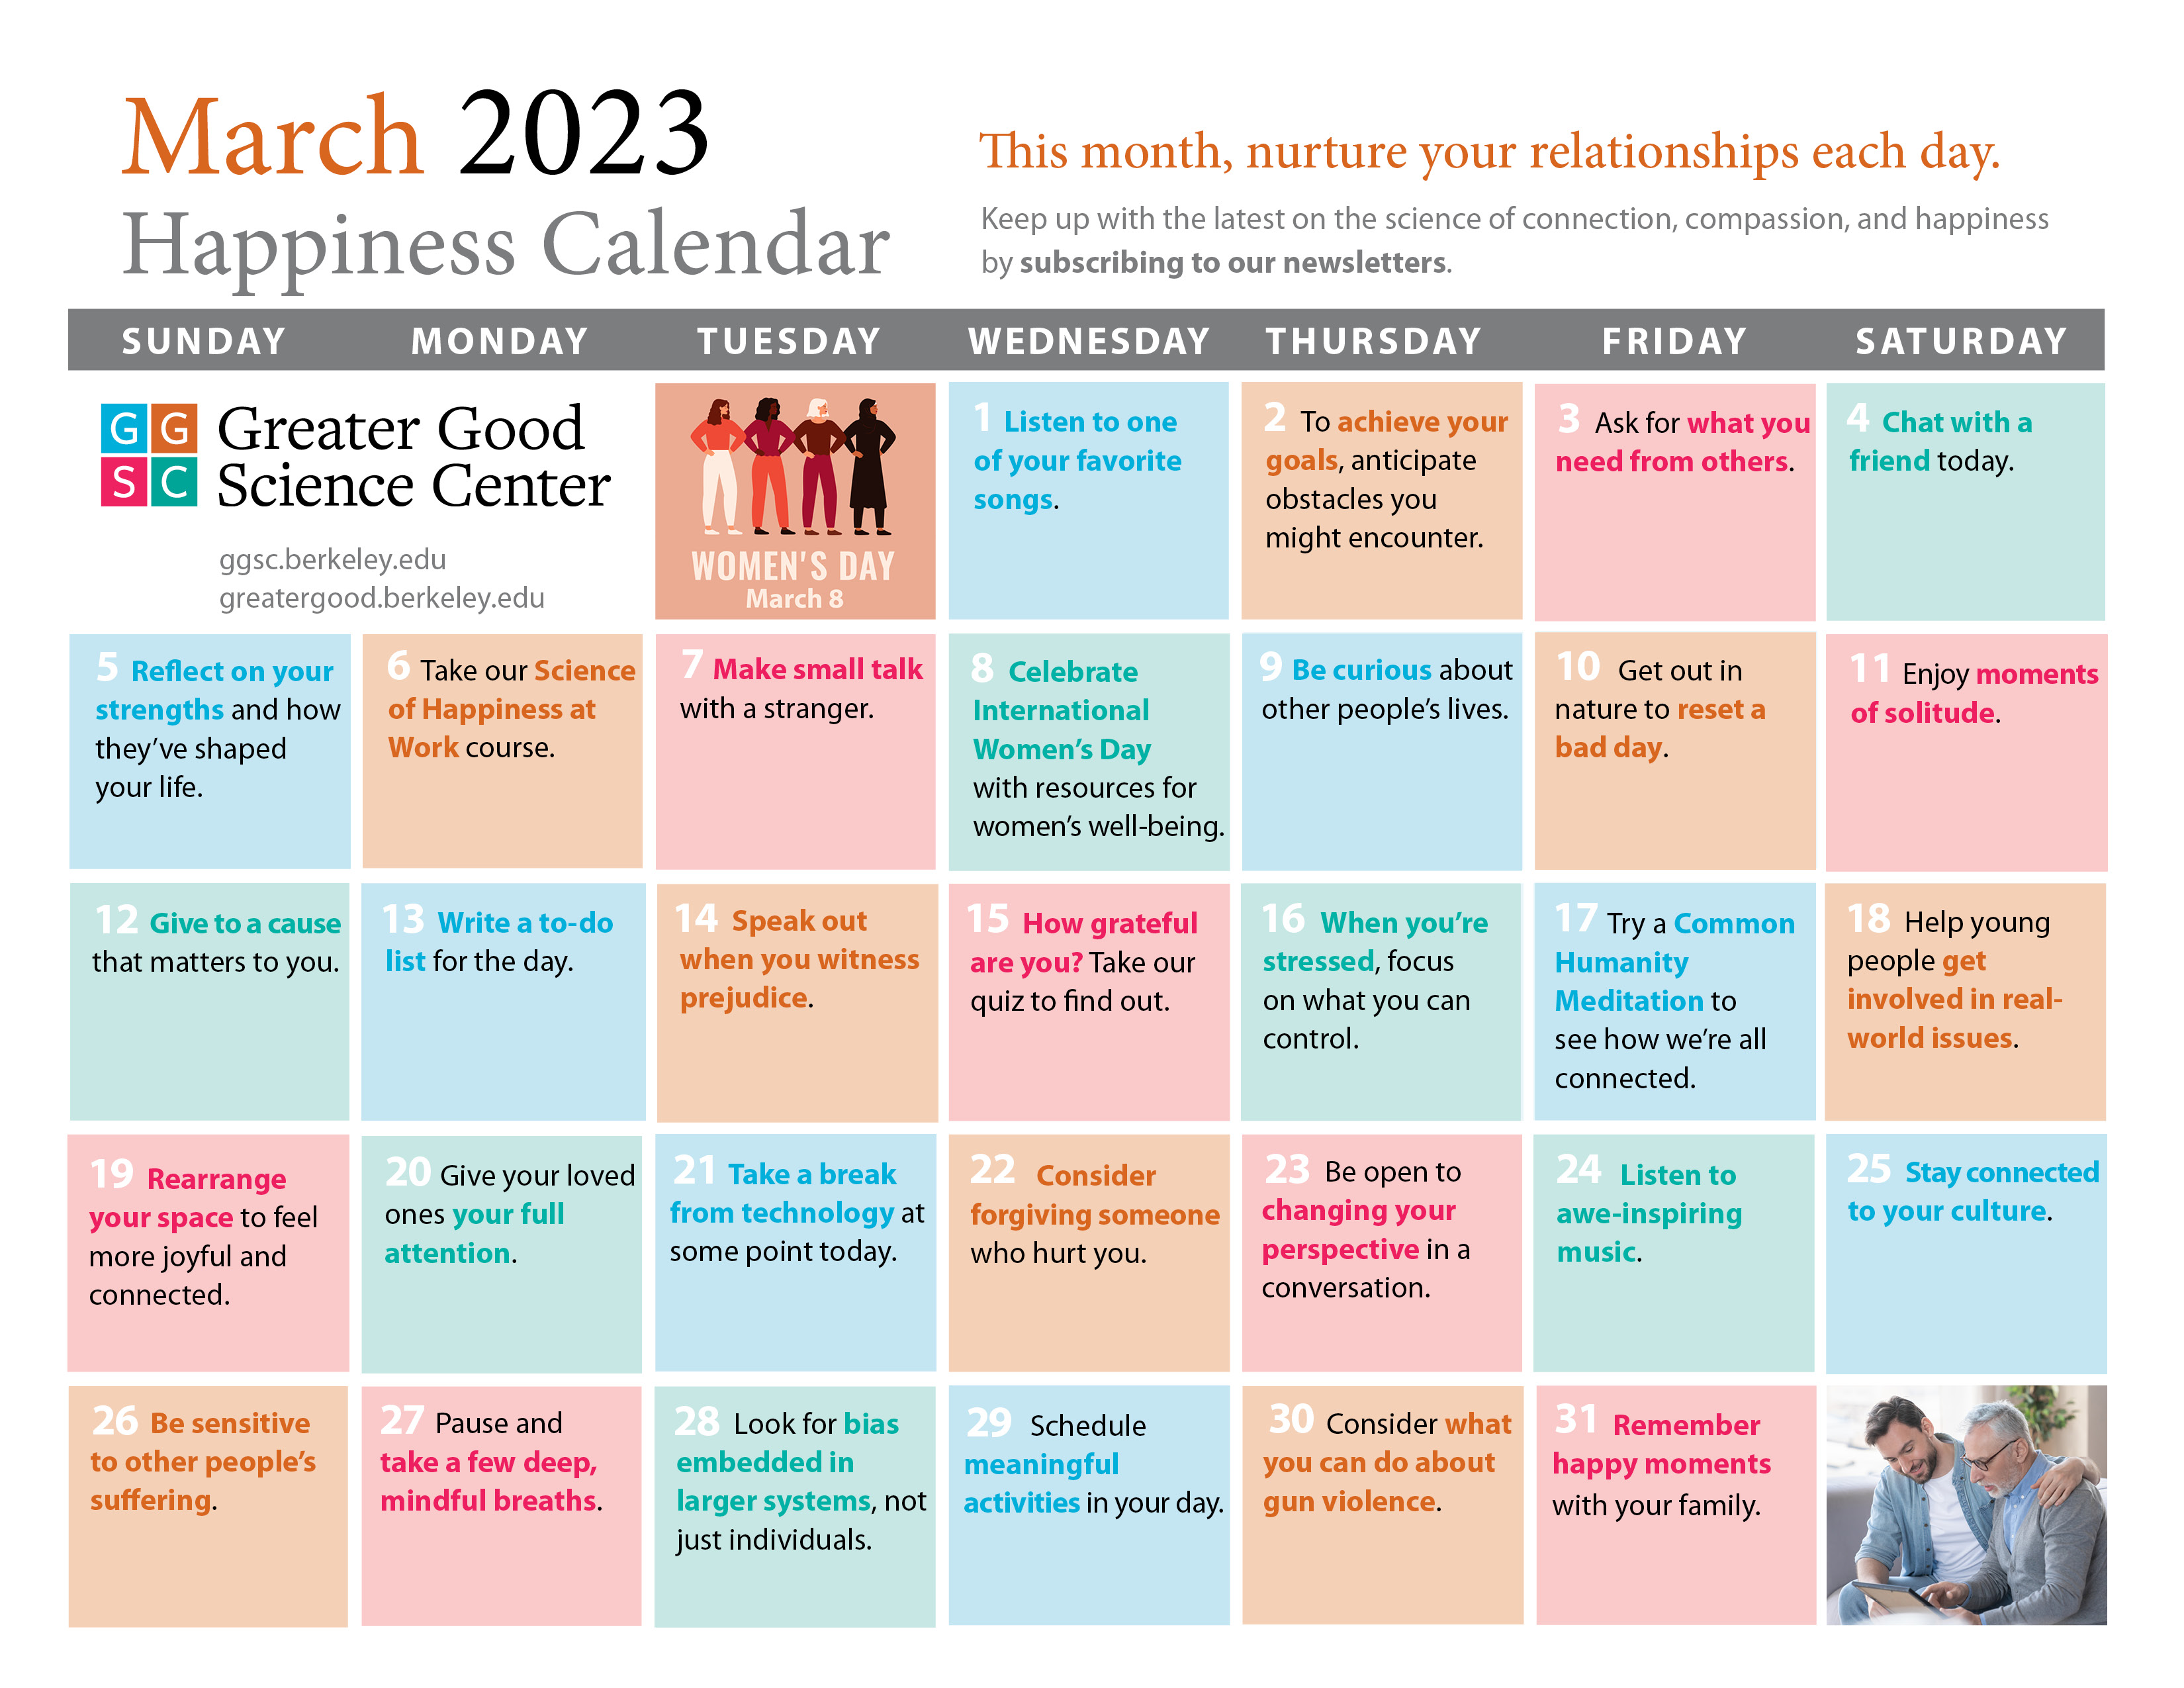 March 2023 happiness calendar